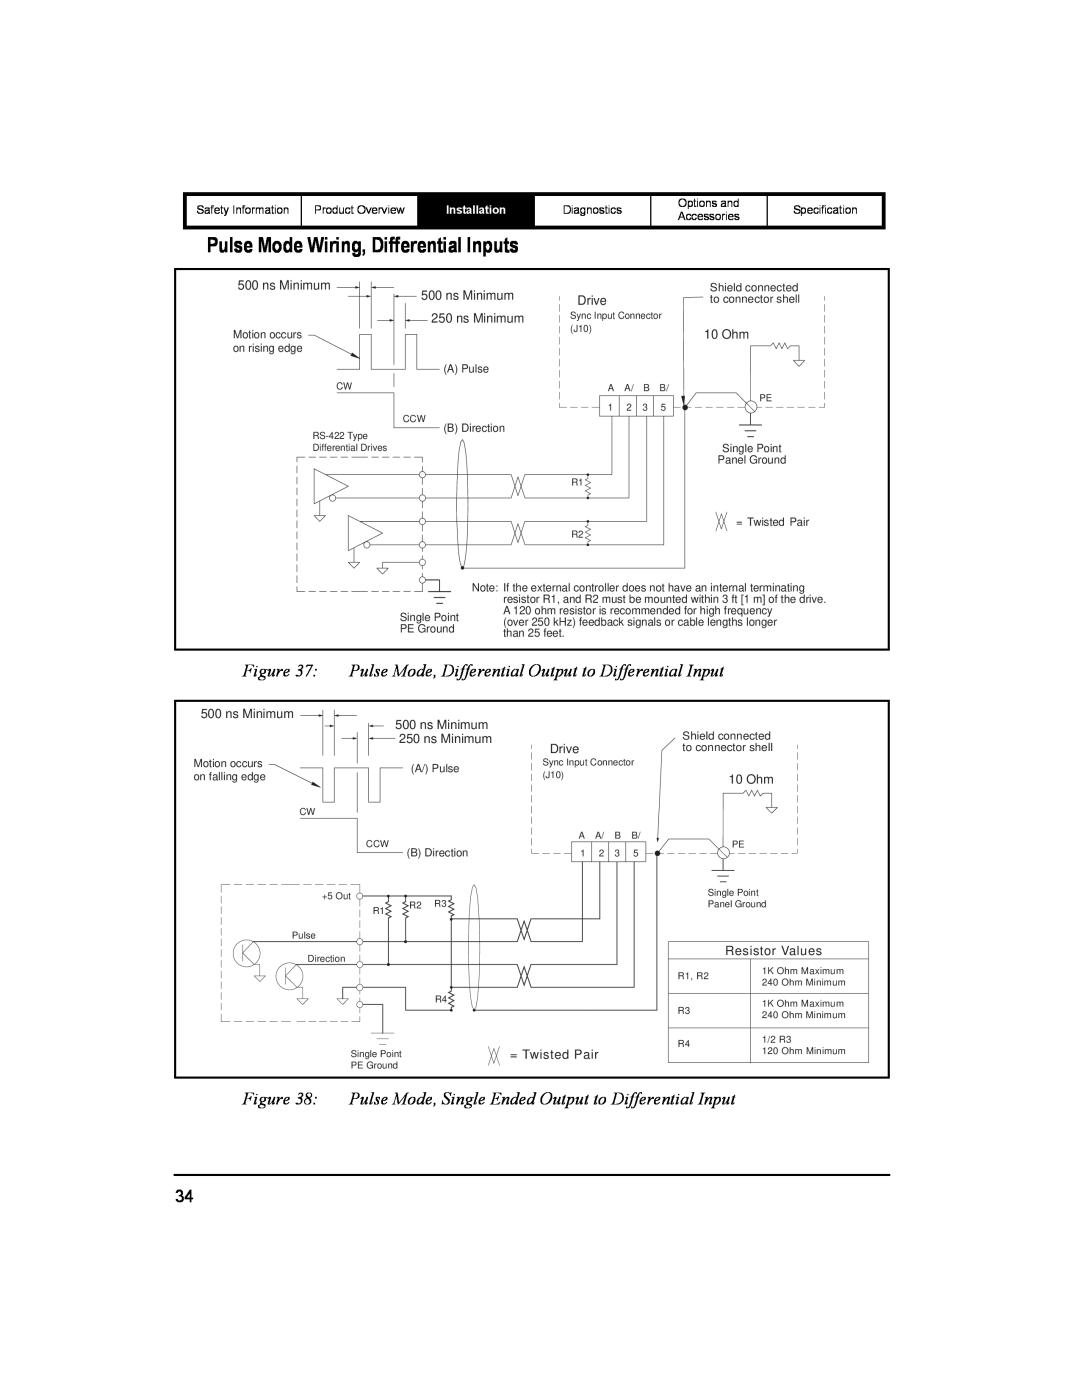 Emerson 400518-01 Pulse Mode Wiring, Differential Inputs, Pulse Mode, Differential Output to Differential Input, Drive 